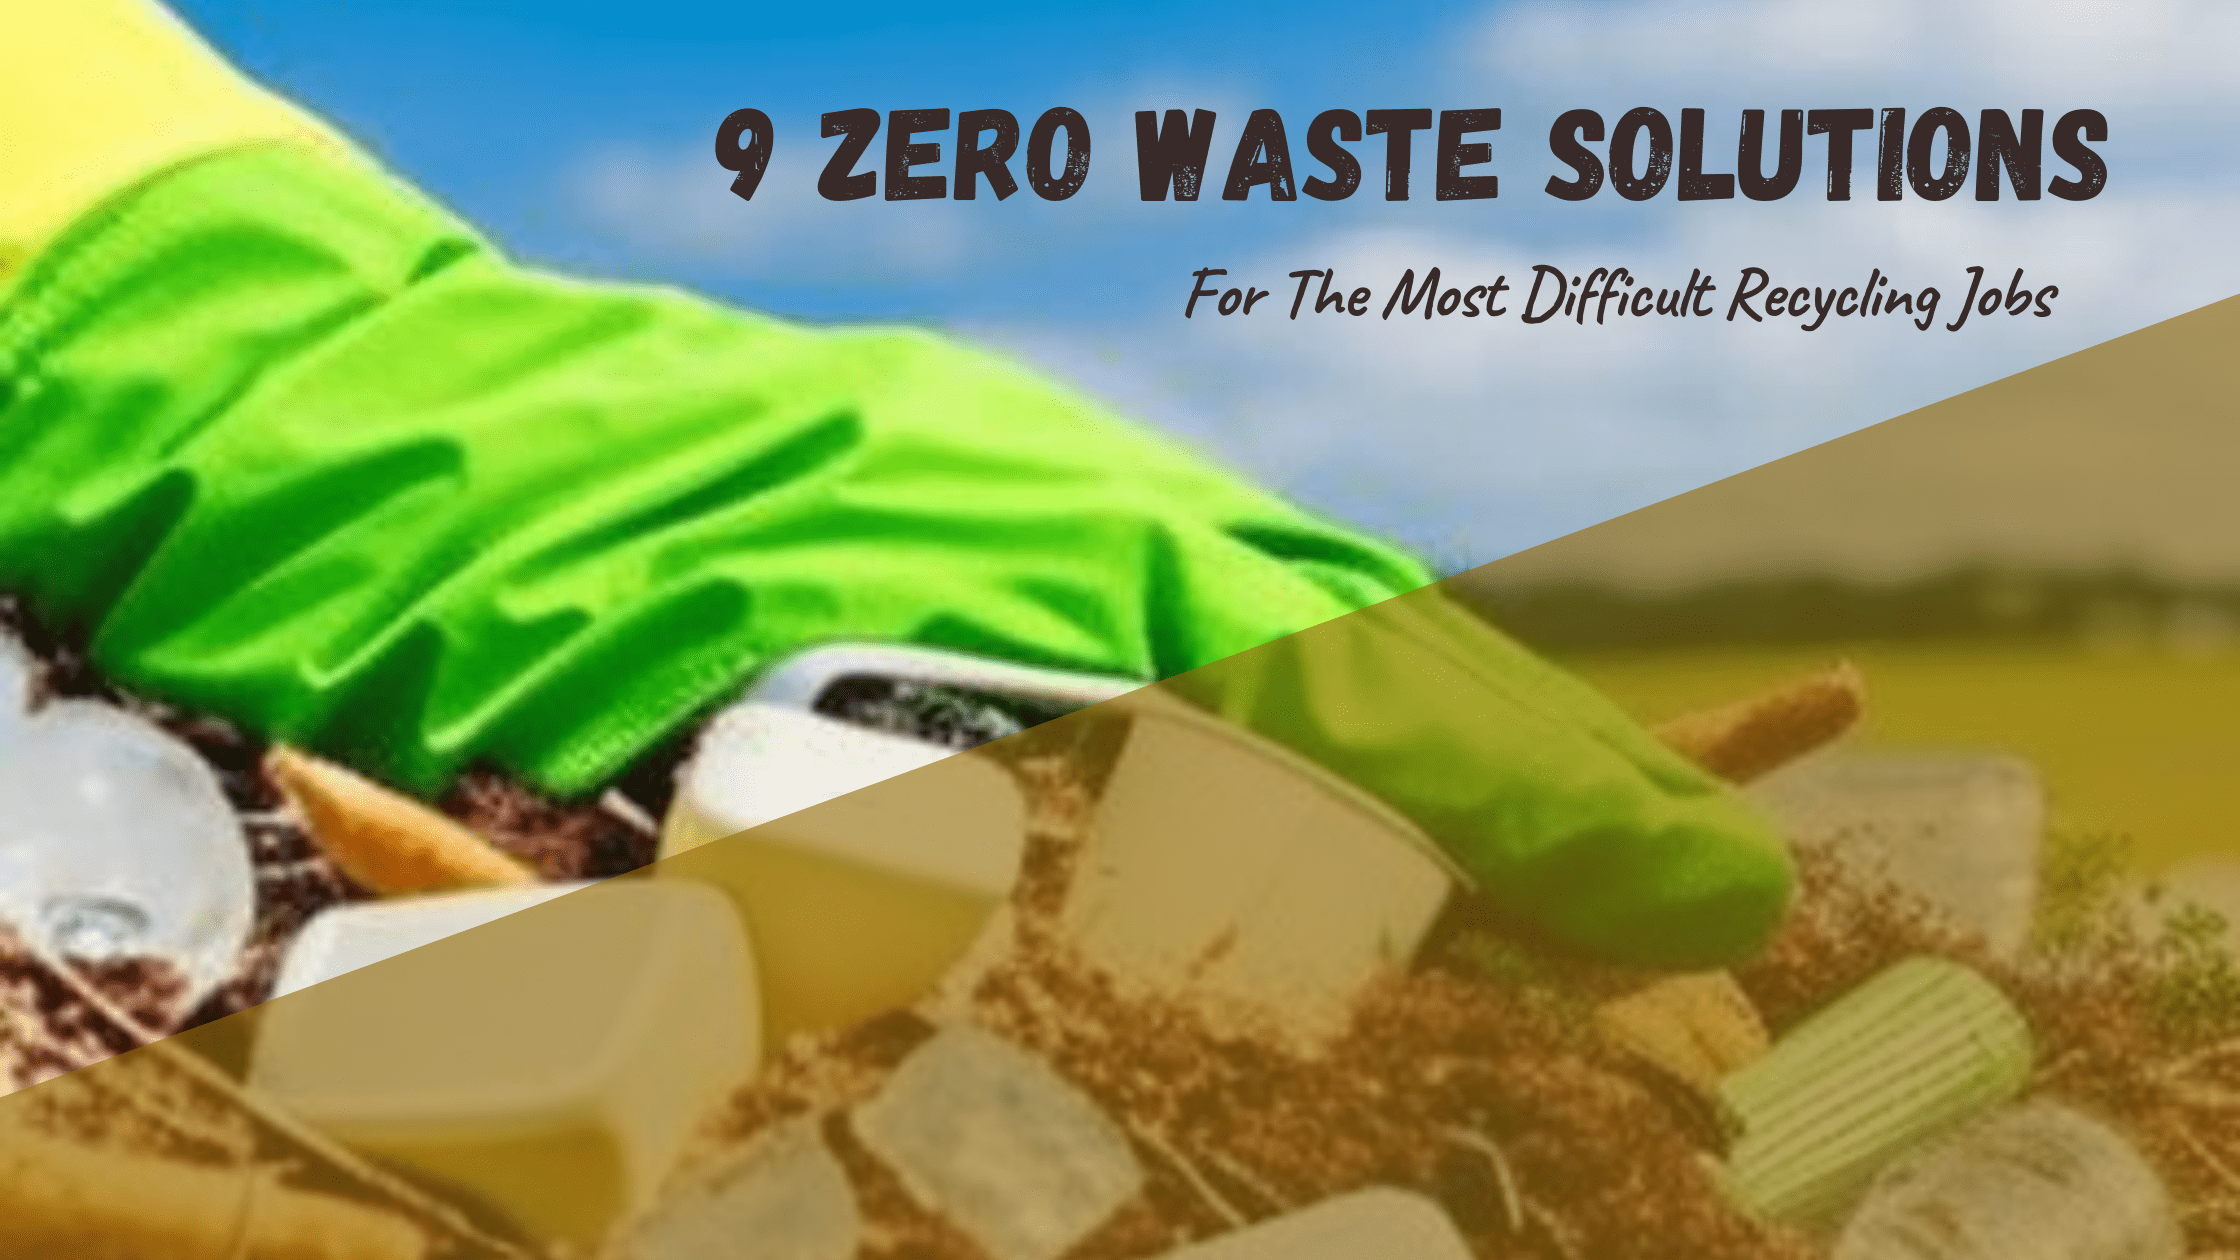 <strong>9 Zero Waste Solutions For The Most Difficult Recycling Jobs</strong>